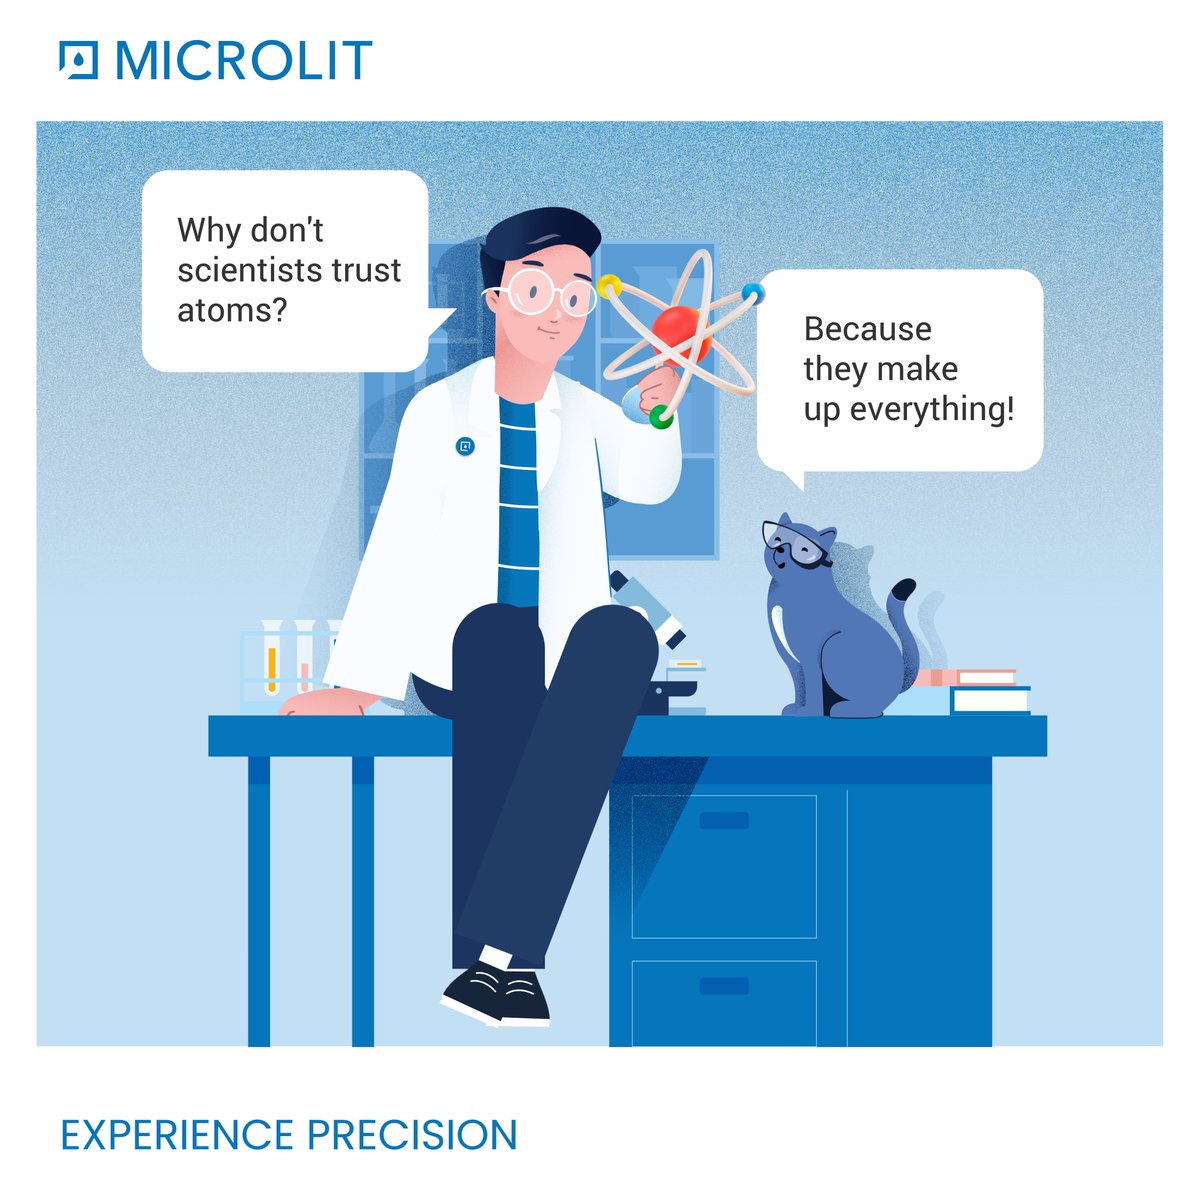 Feeling Blue? Mike & Billy to the rescue!

#Microlit #Mike #Billy #ComicStrip #EnablingInnovations #AccuracyMatters #ExperiencePrecision